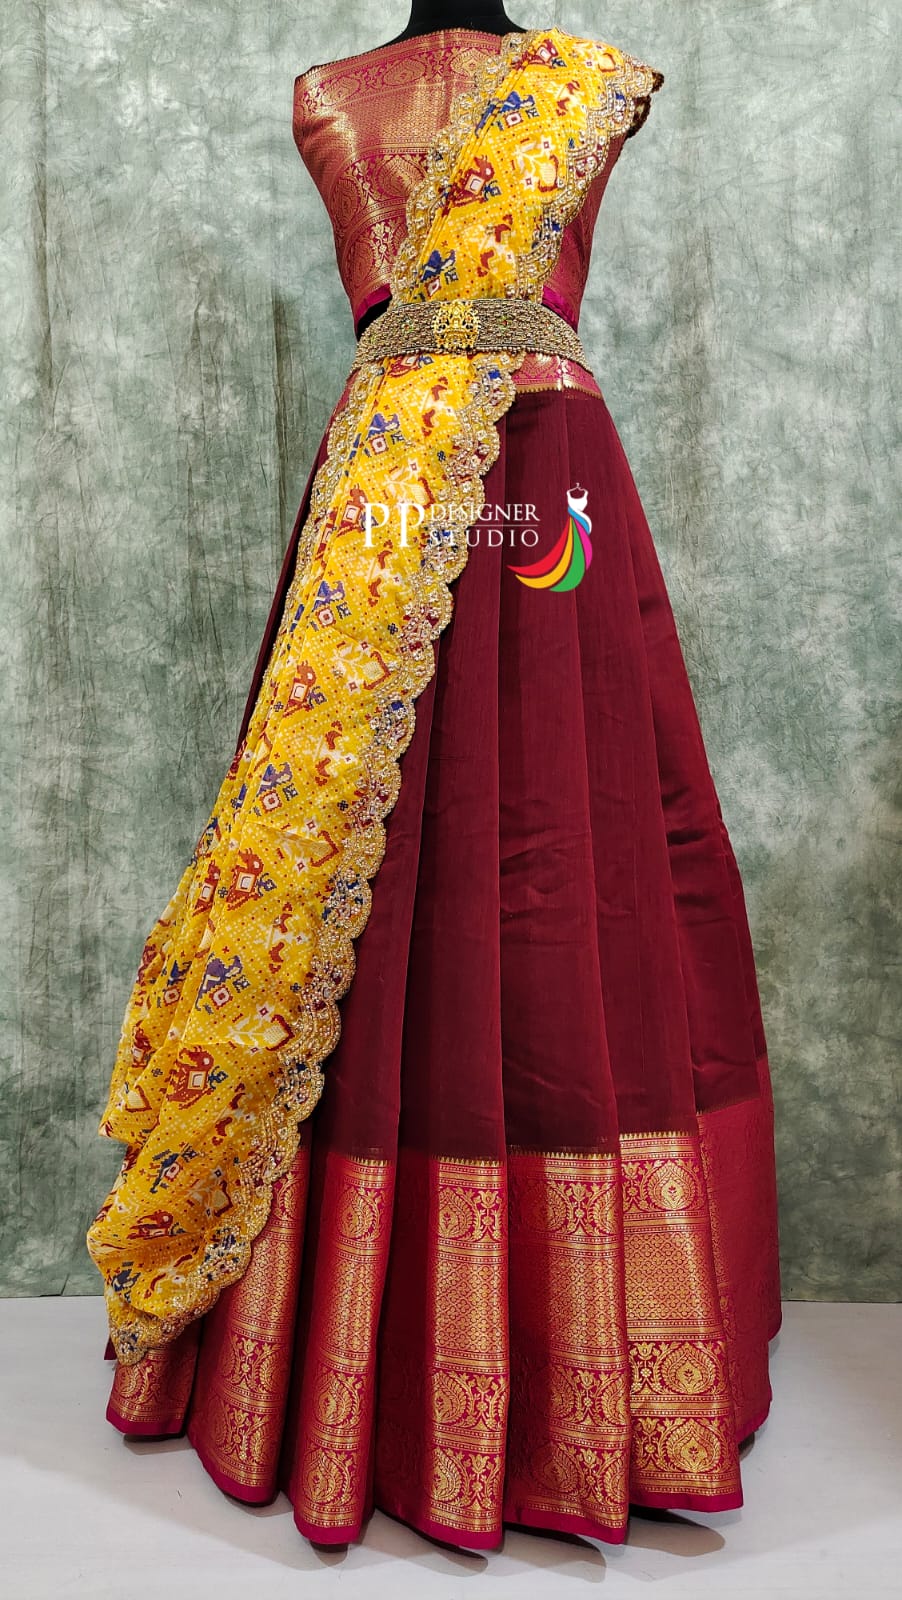 A Simple Guide To Storing And Preserving Kanchipuram Sarees | KALKI Fashion  Blogs